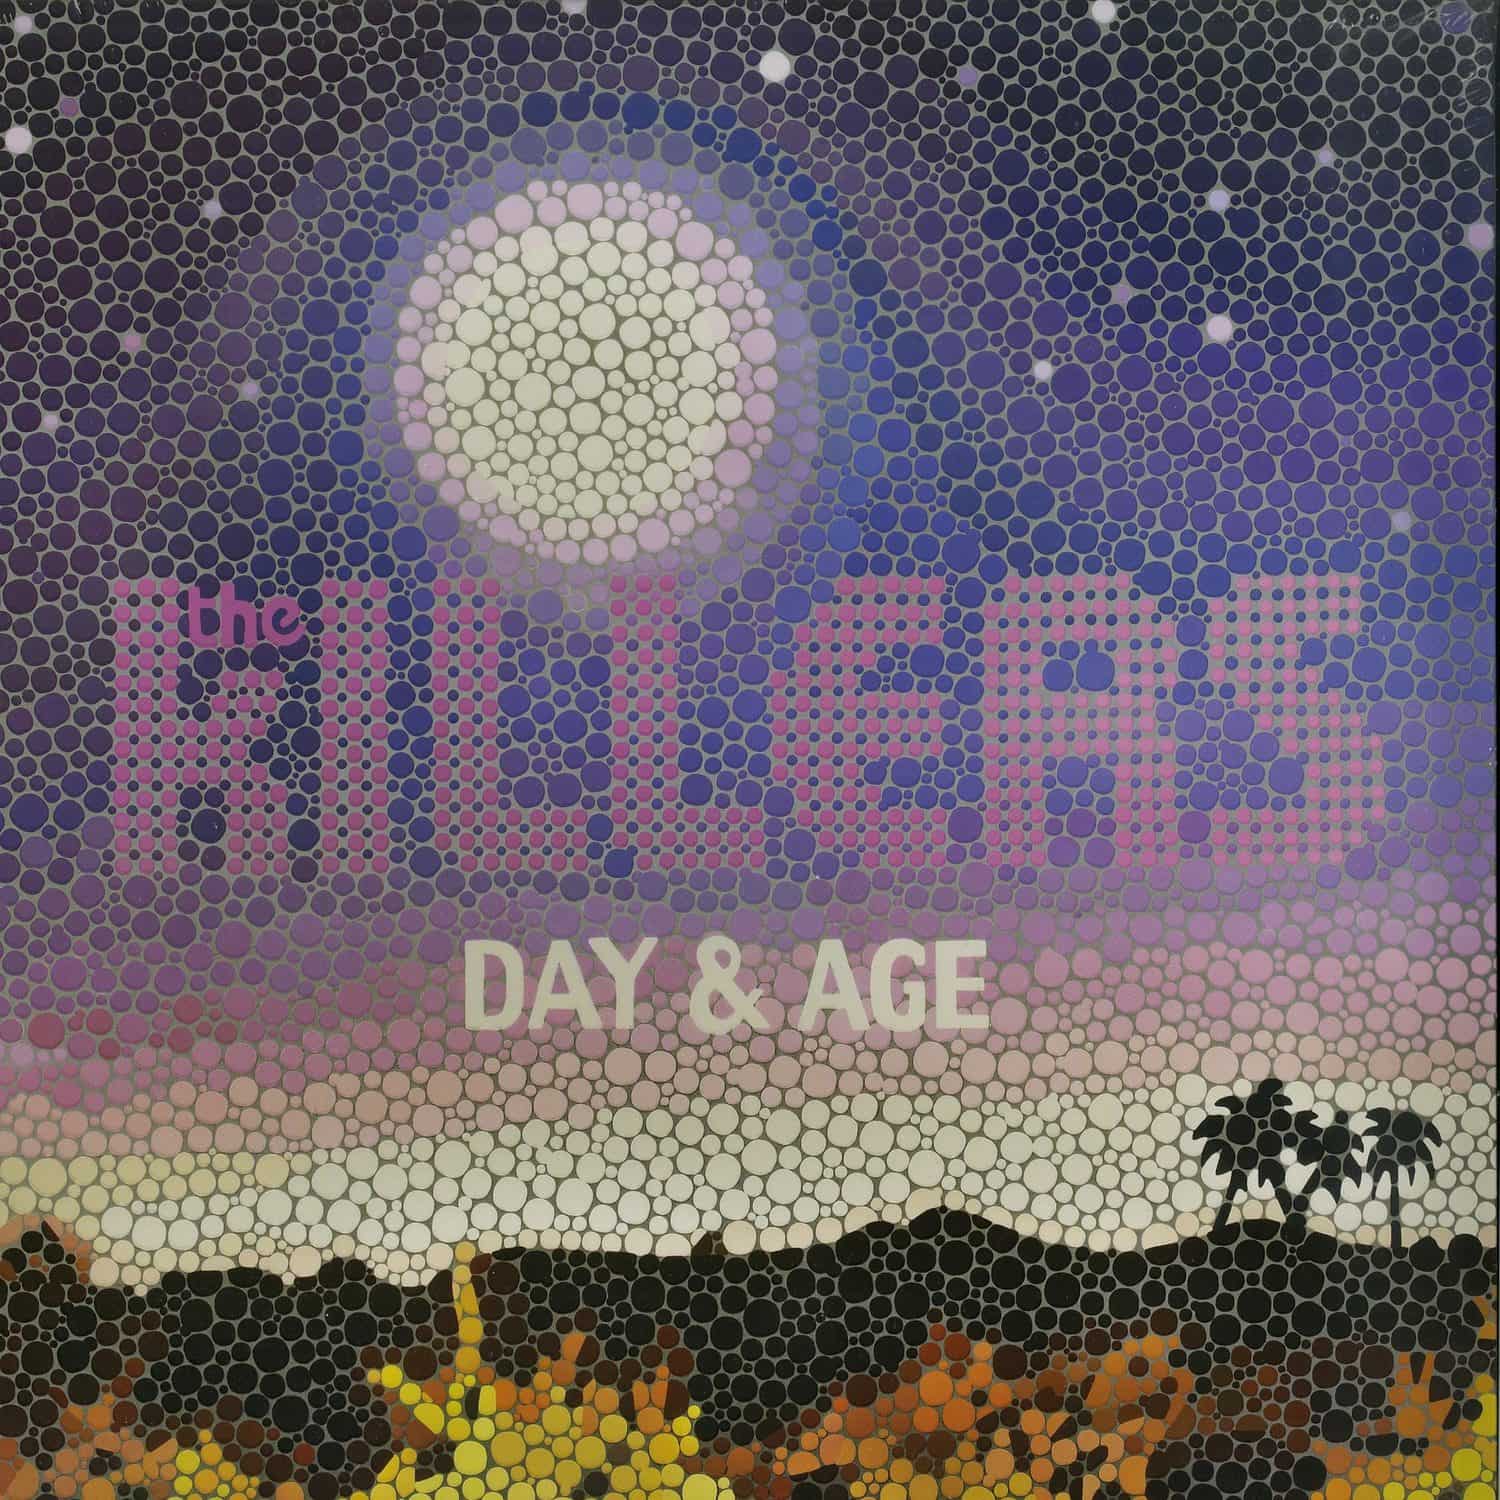 The Killers - DAY & AGE 